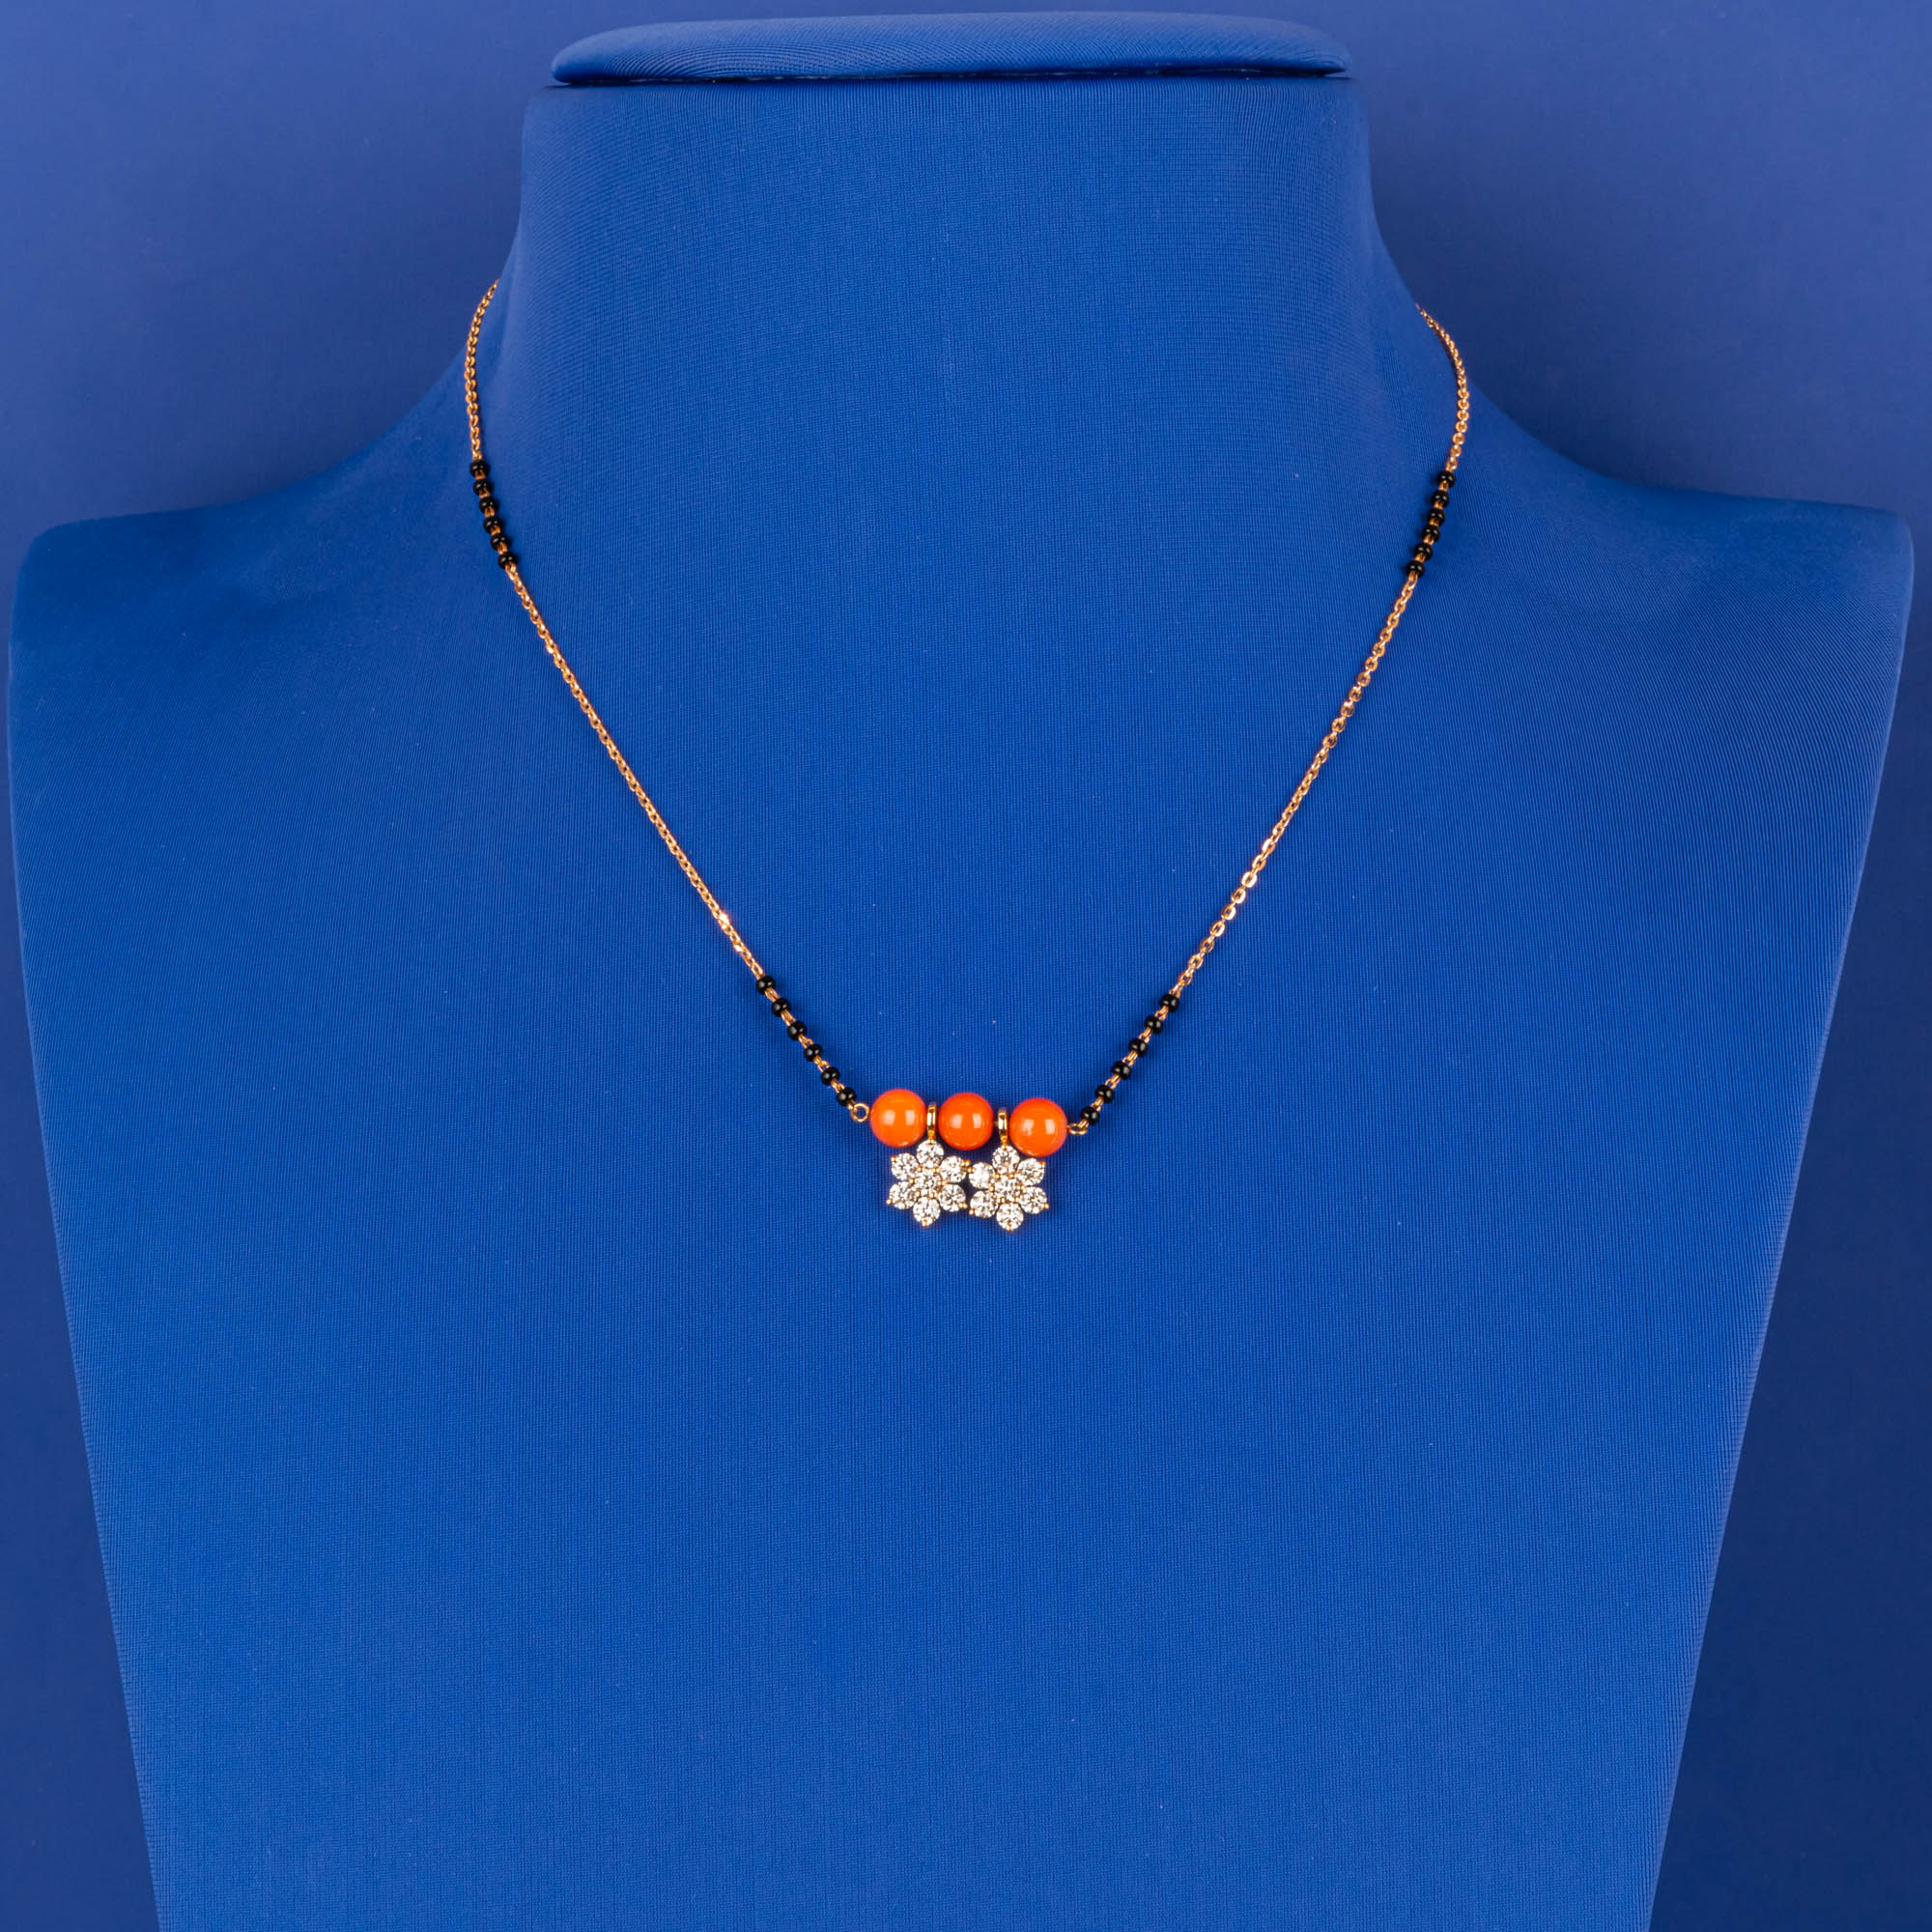 Floral Bloom: Handmade 18K Rose Gold Diamond and Mangalsutra Necklace